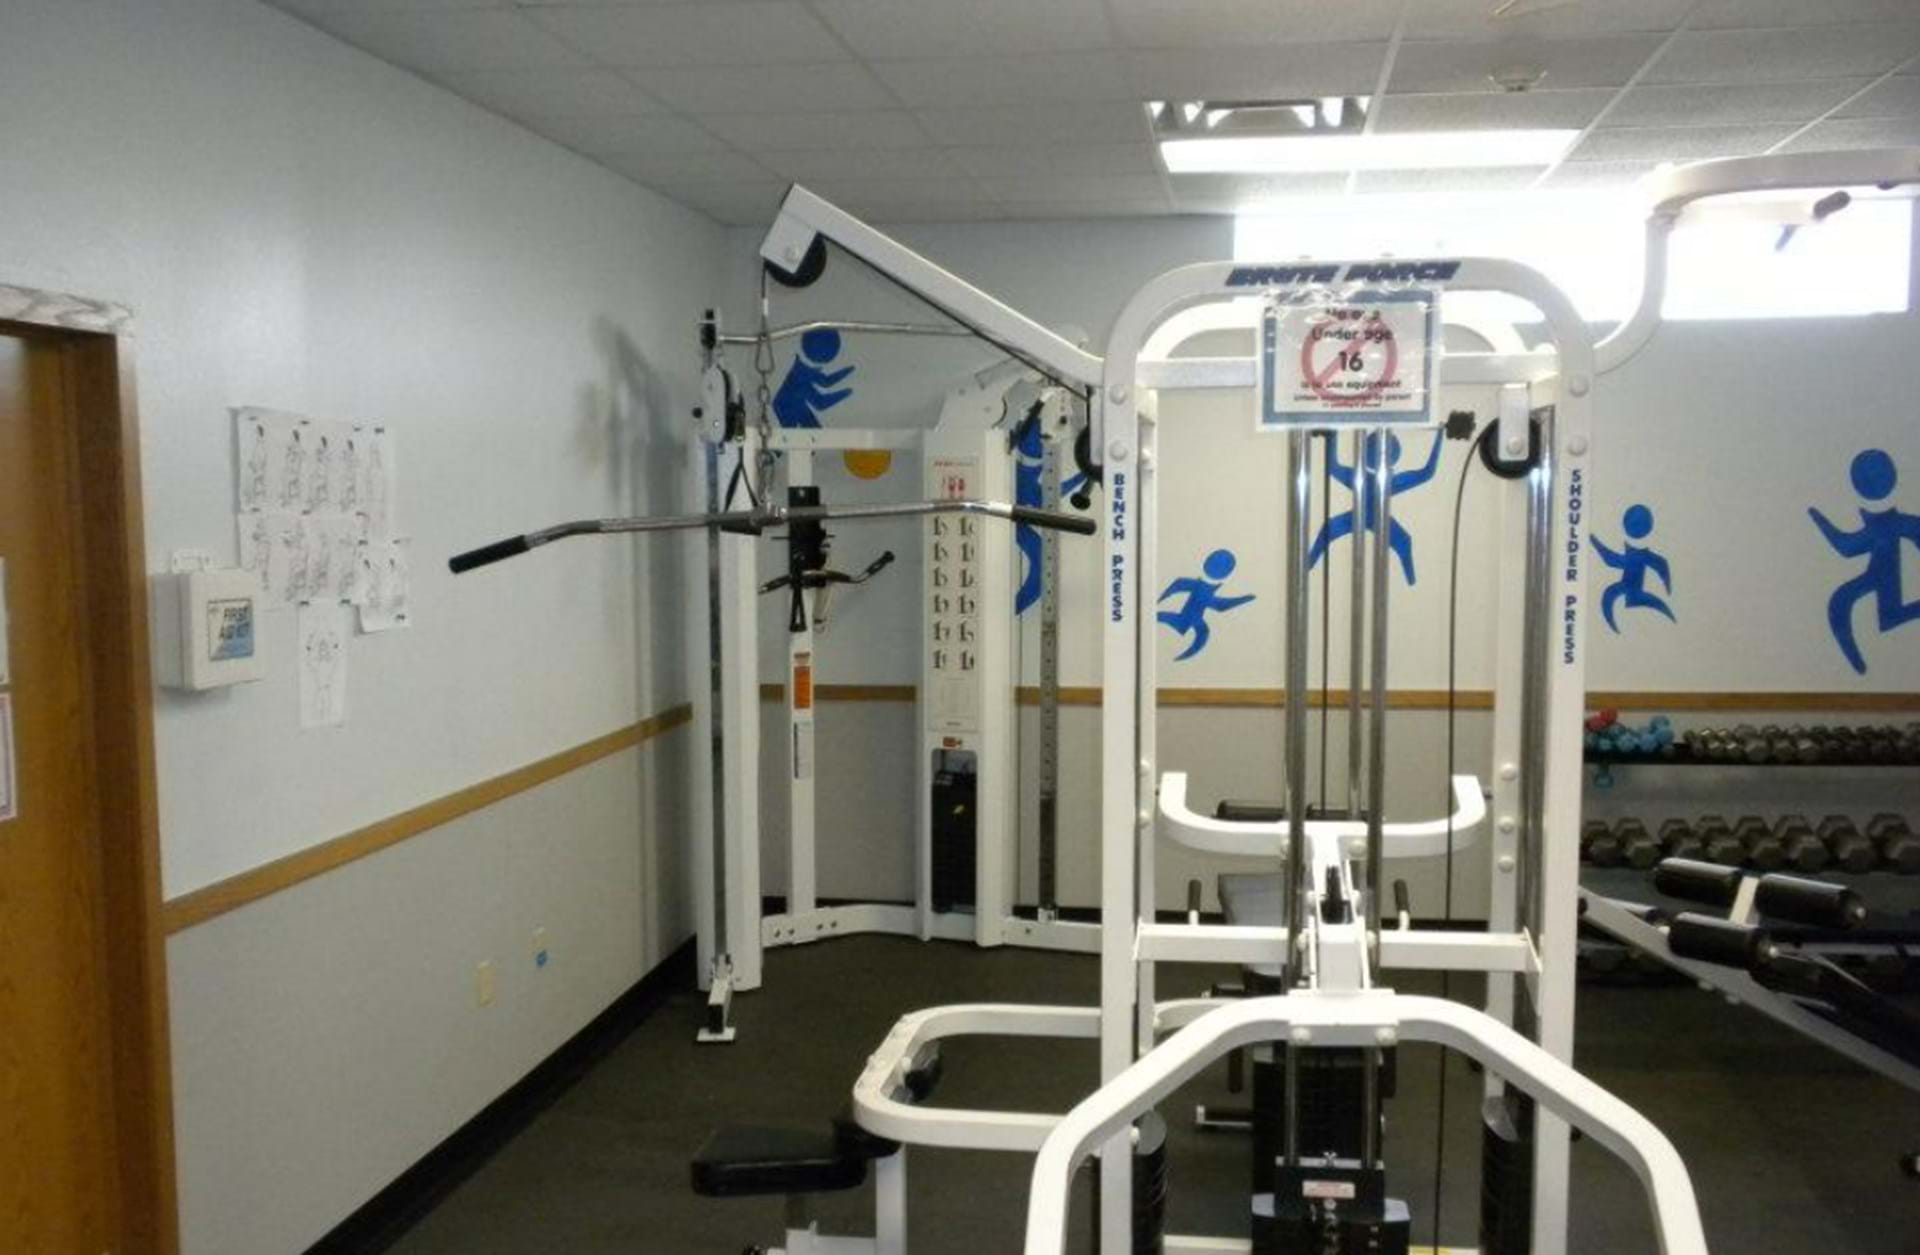 Many machines and work out equipment